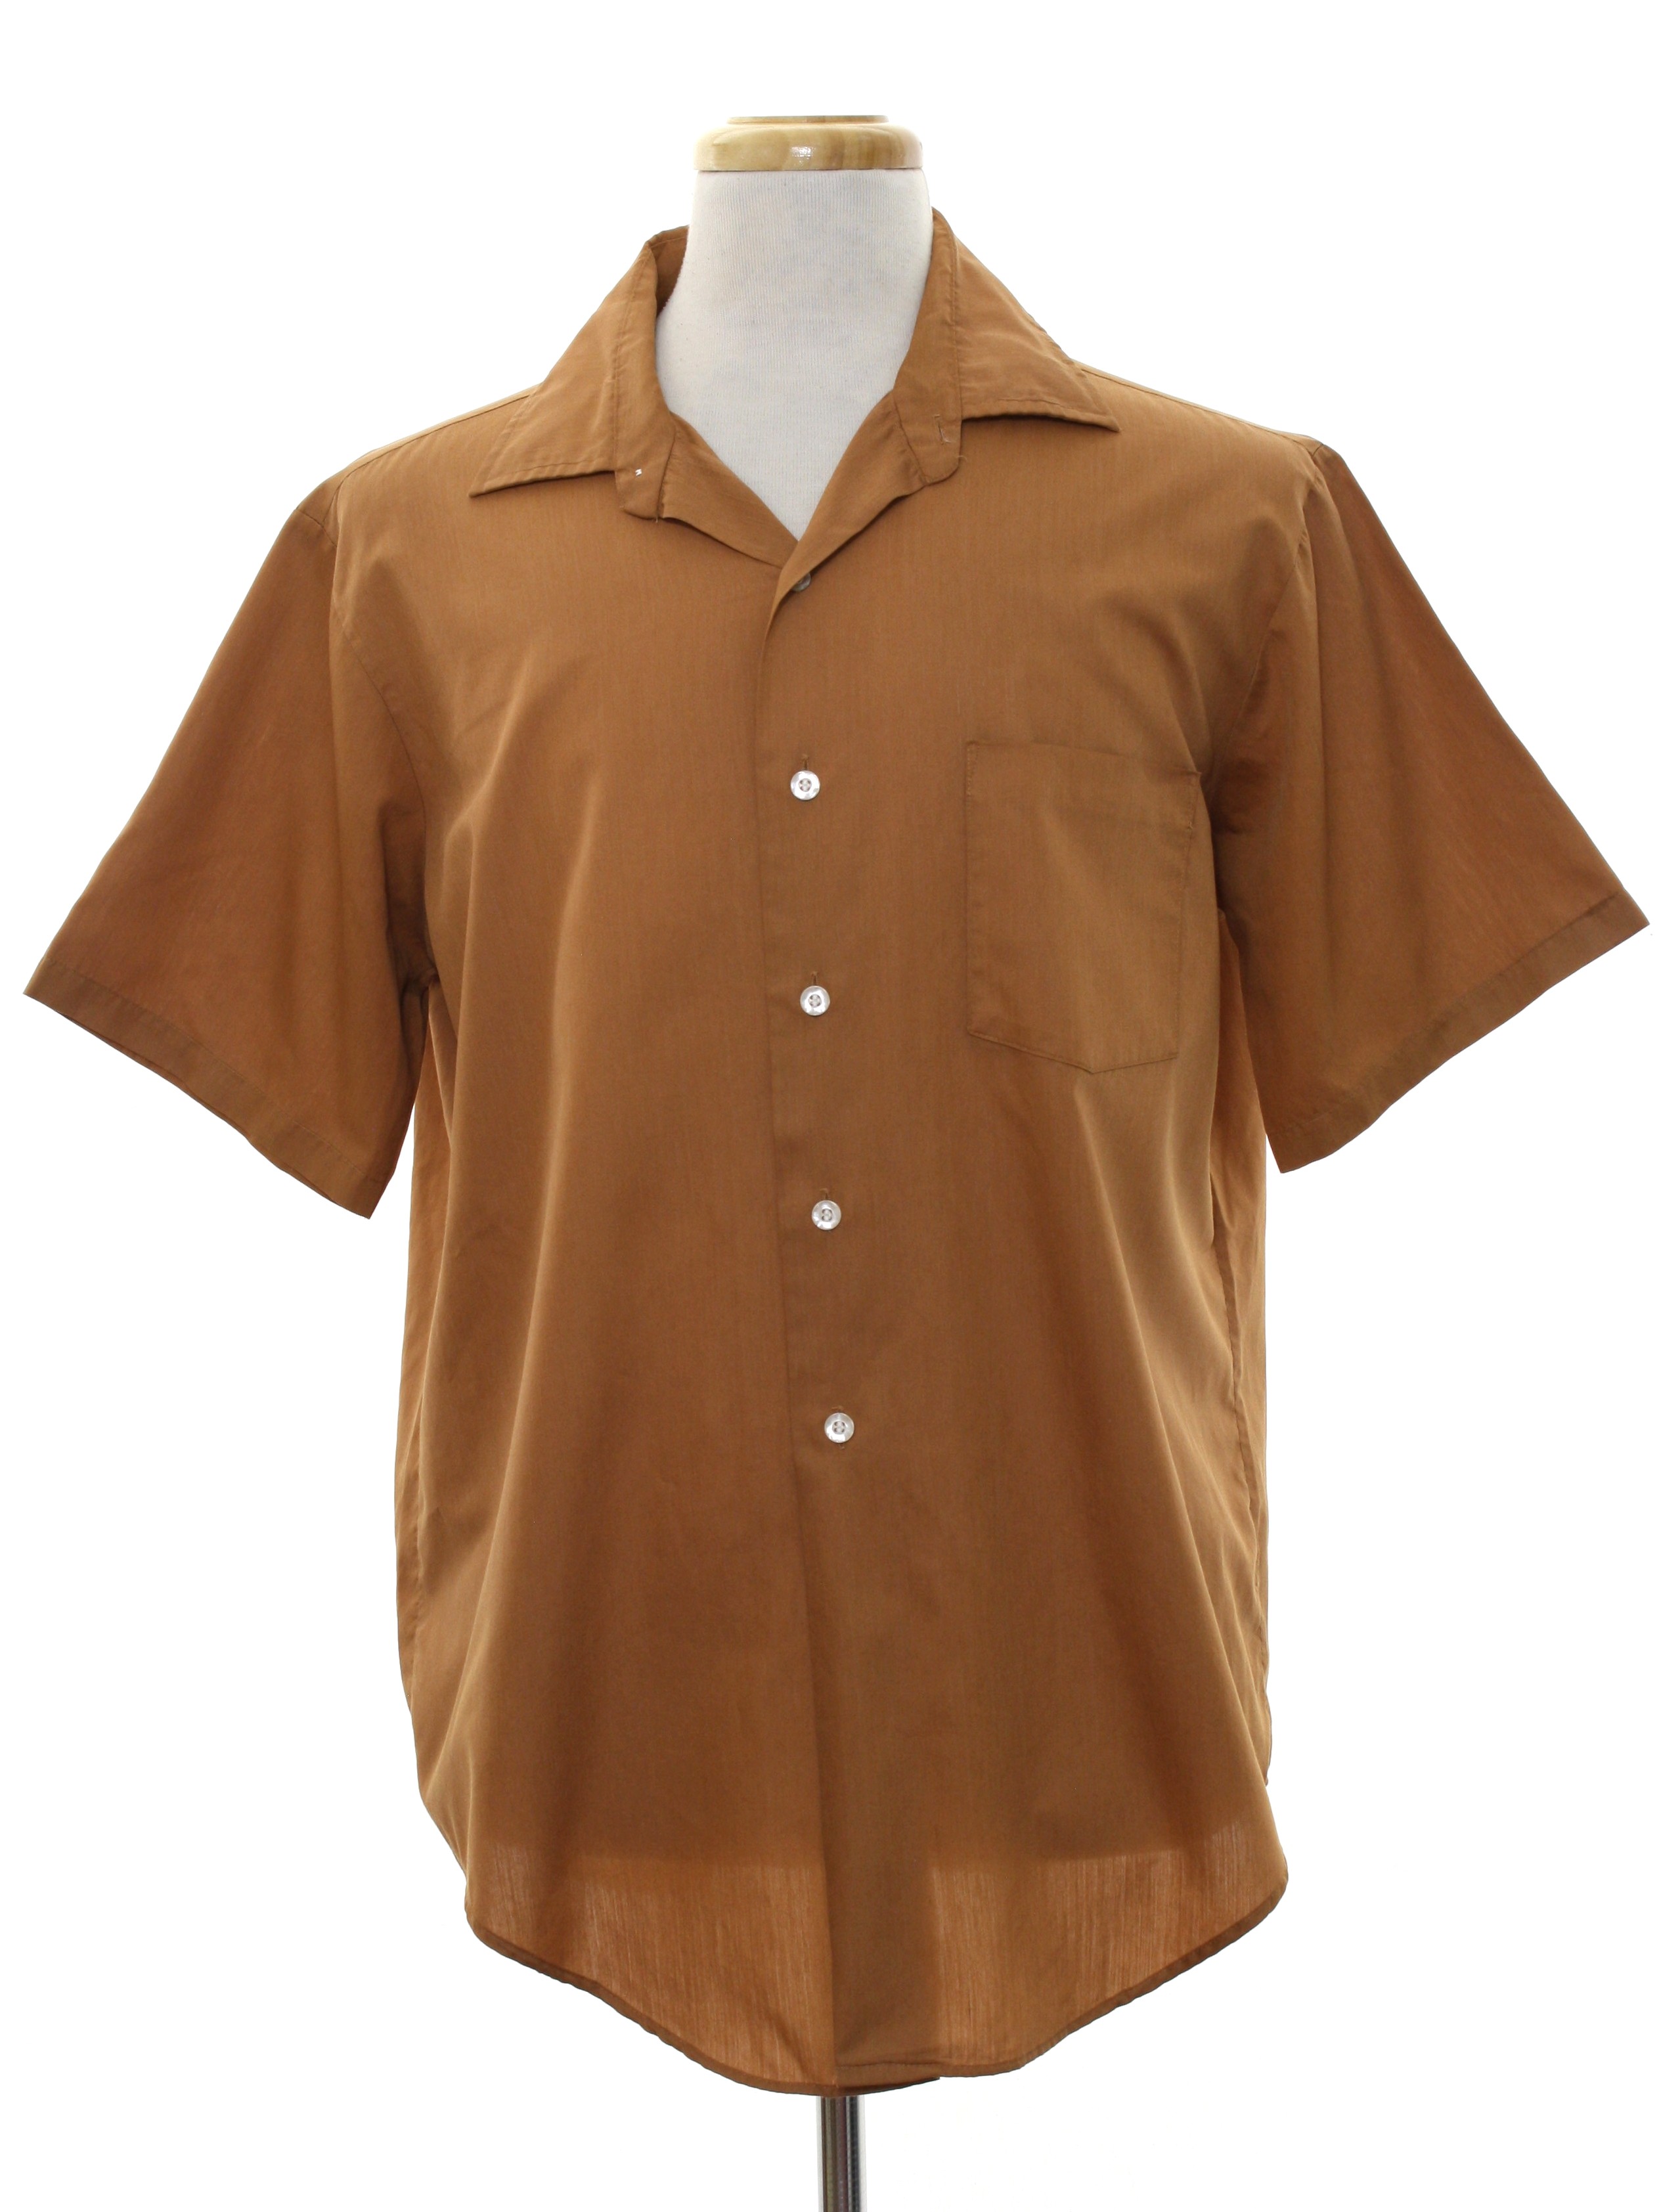 Vintage Towncraft 60's Shirt: 60s -Towncraft- Mens warm brown ...